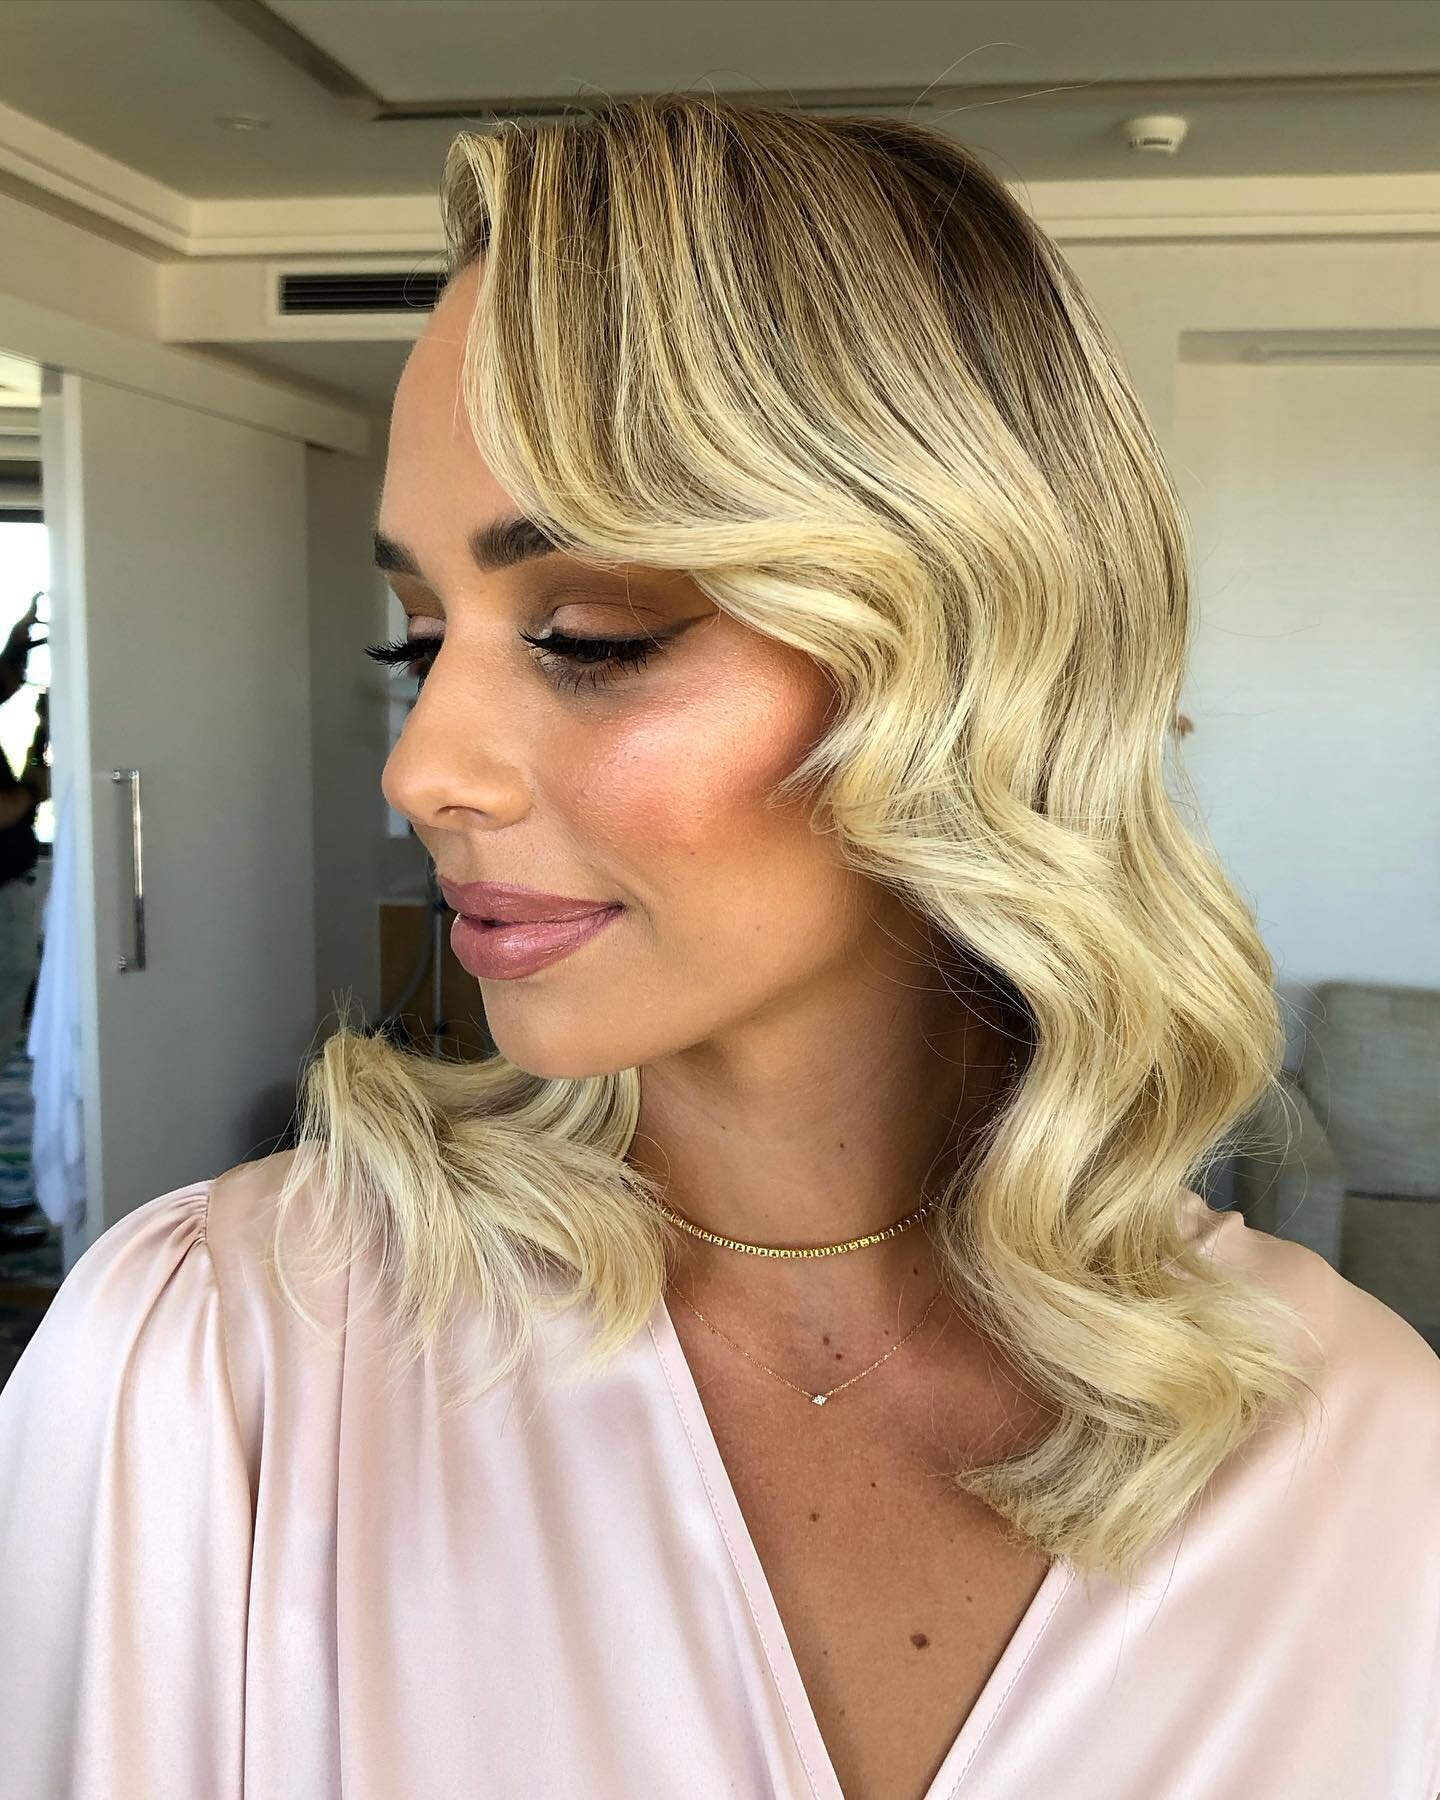 Effortless glam waves for this bridesmaid recently, stunning makeup by the wonderful @ericacoffeymua